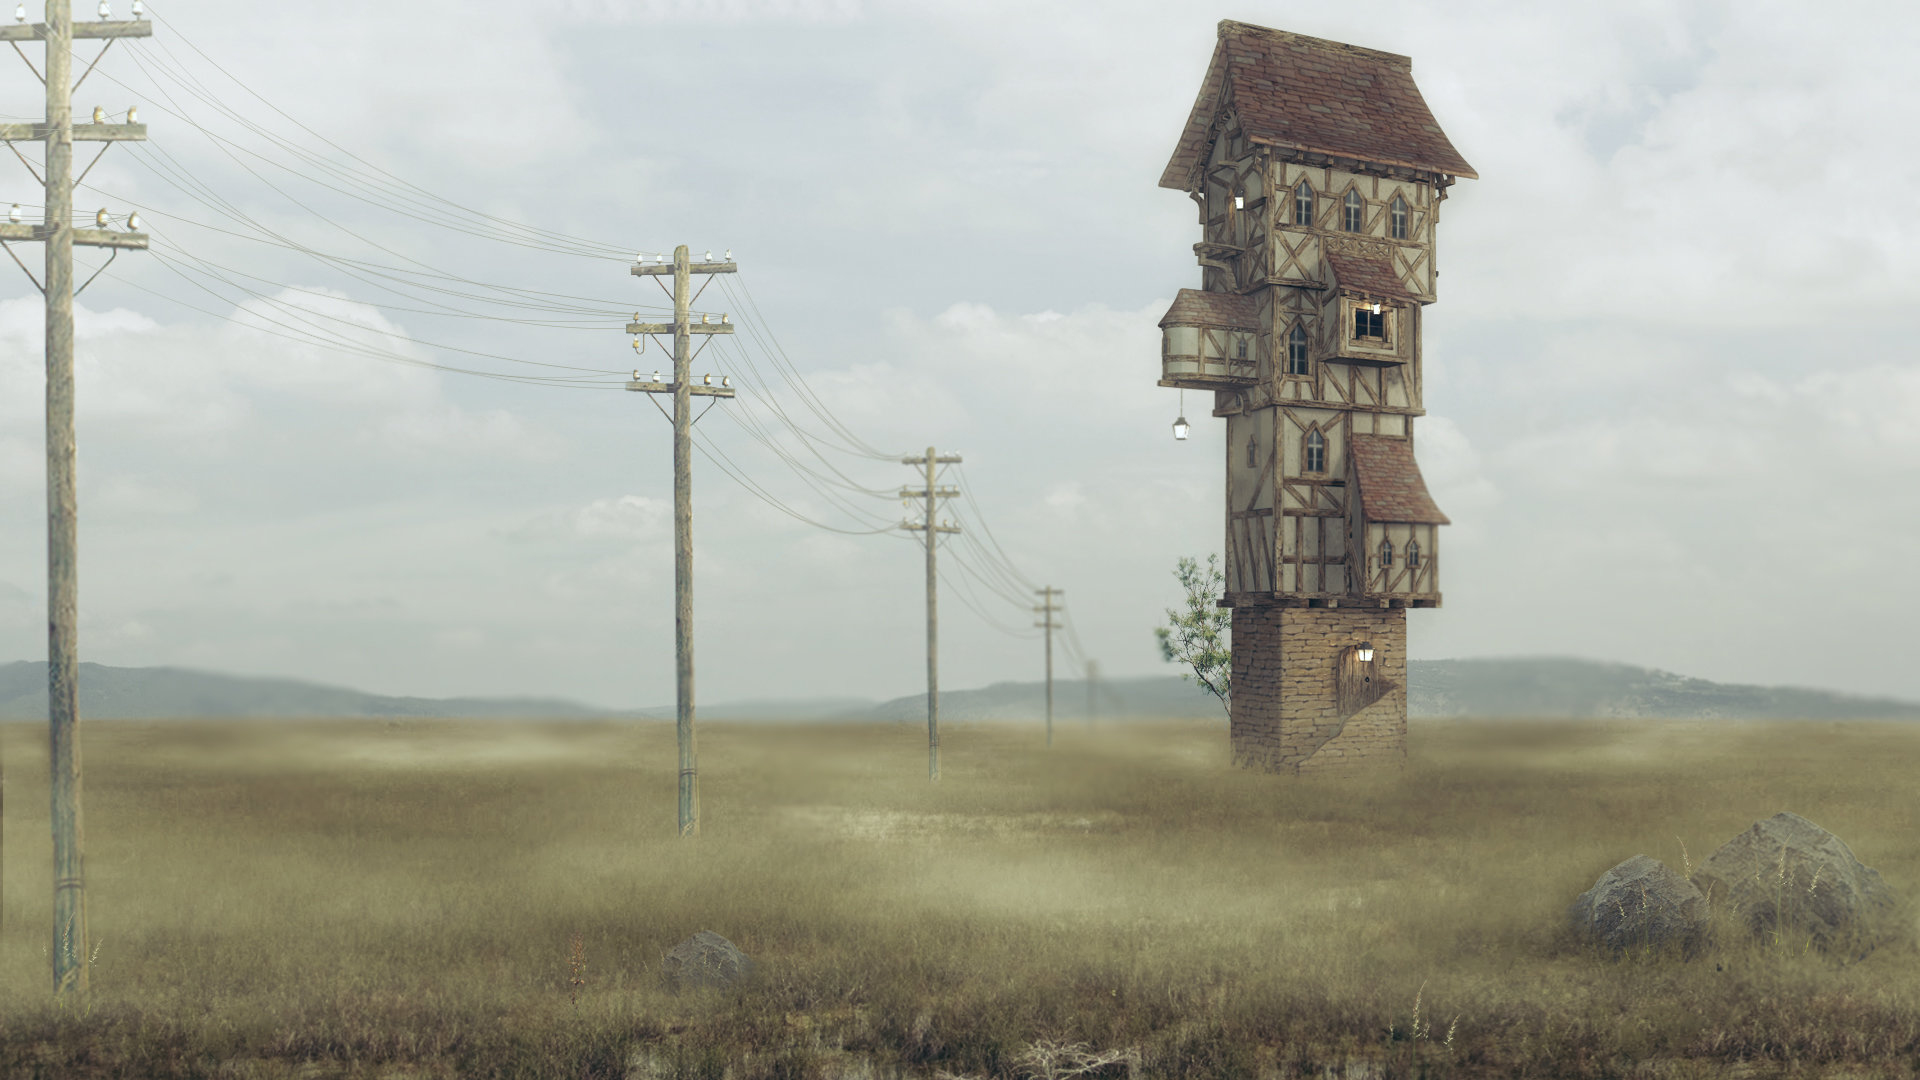 House in the middle of nowhere by Alexia Ferry